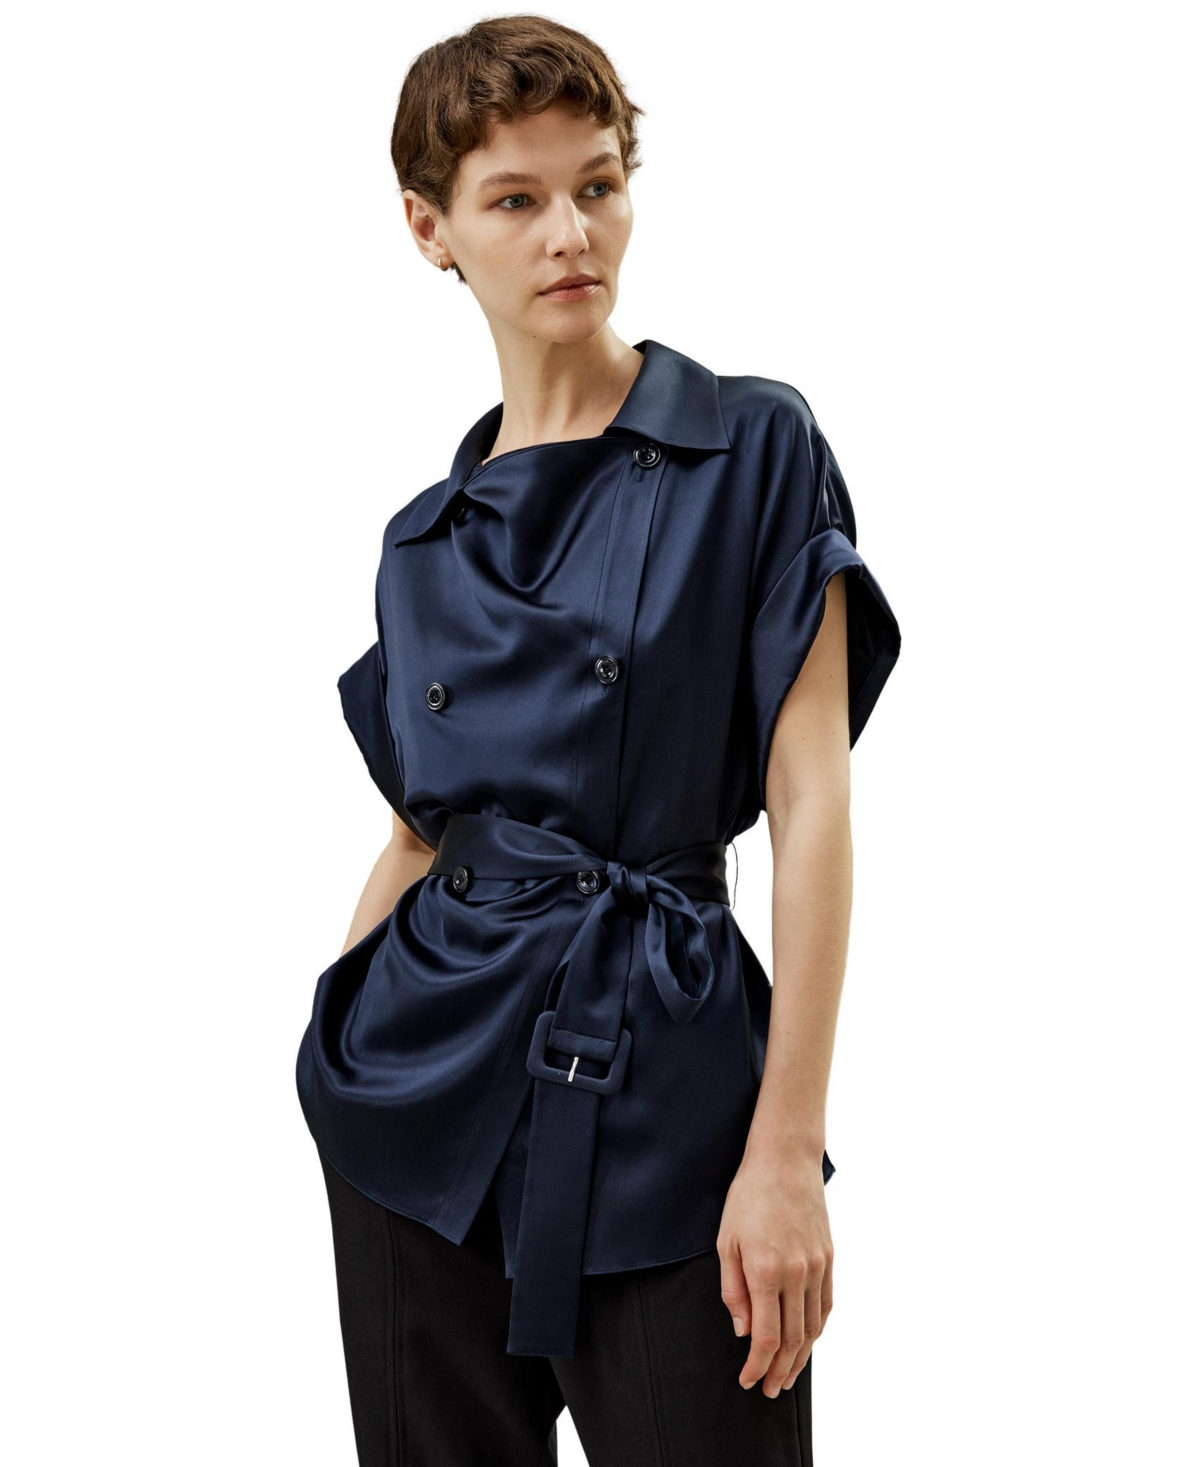 Roll-up Short Sleeves Top with Waist Belt for Women - Navy blue